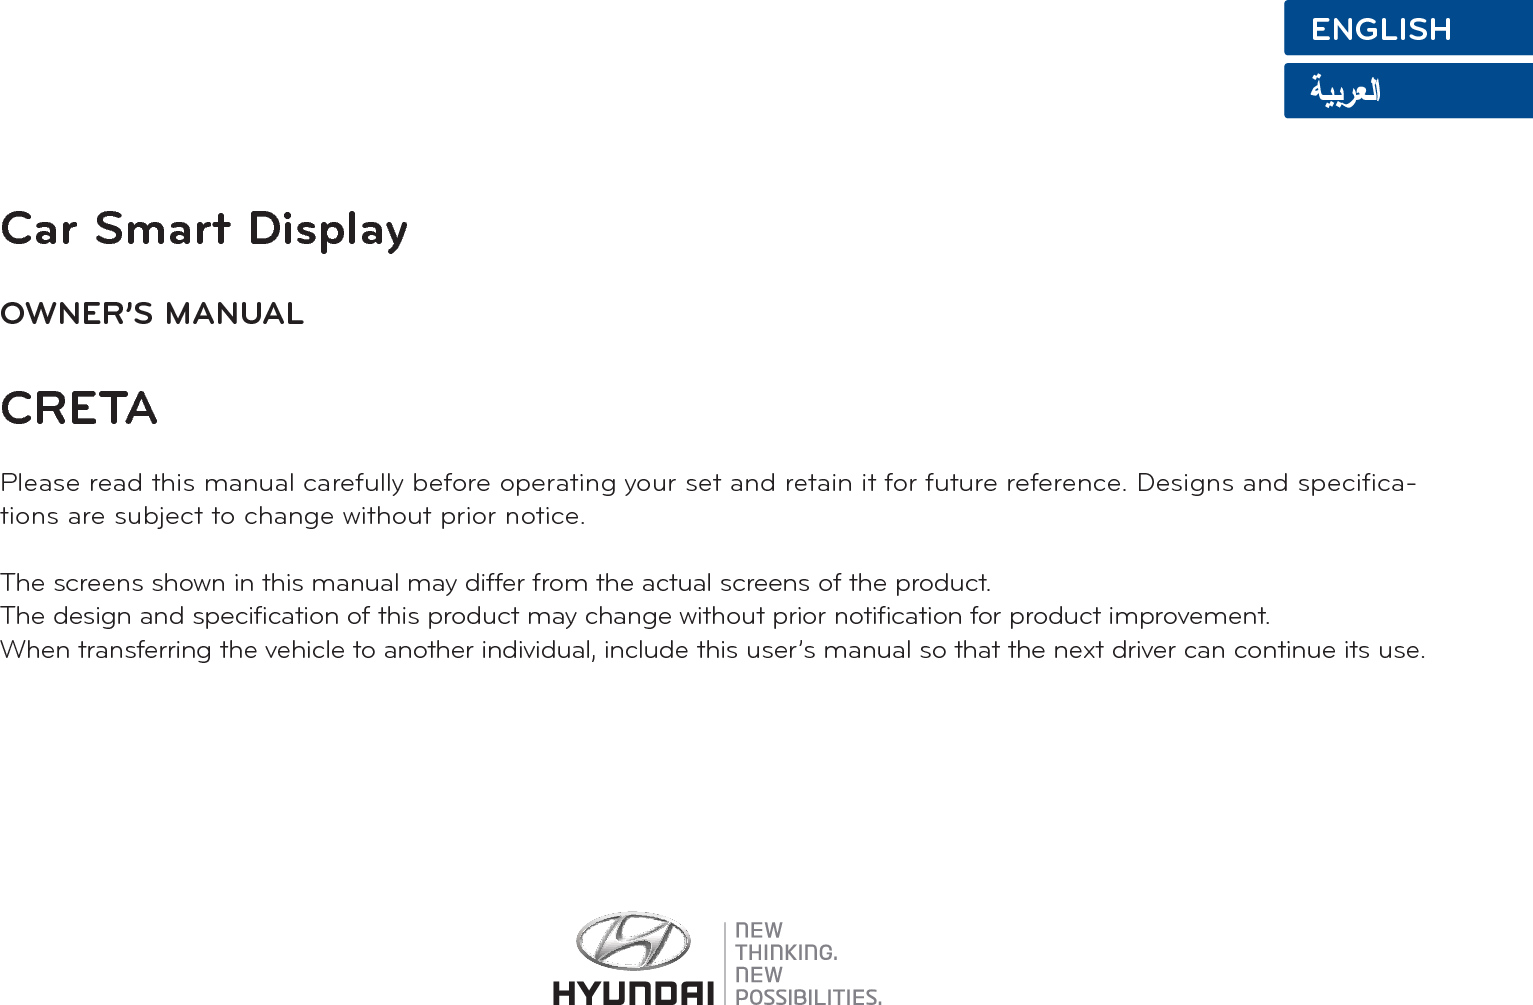 Car Smart DisplayOWNER’S MANUALCRETAPlease read this manual carefully before operating your set and retain it for future reference. Designs and specifica-tions are subject to change without prior notice.The screens shown in this manual may differ from the actual screens of the product.The design and specification of this product may change without prior notification for product improvement.When transferring the vehicle to another individual, include this user’s manual so that the next driver can continue its use.ENGLISH